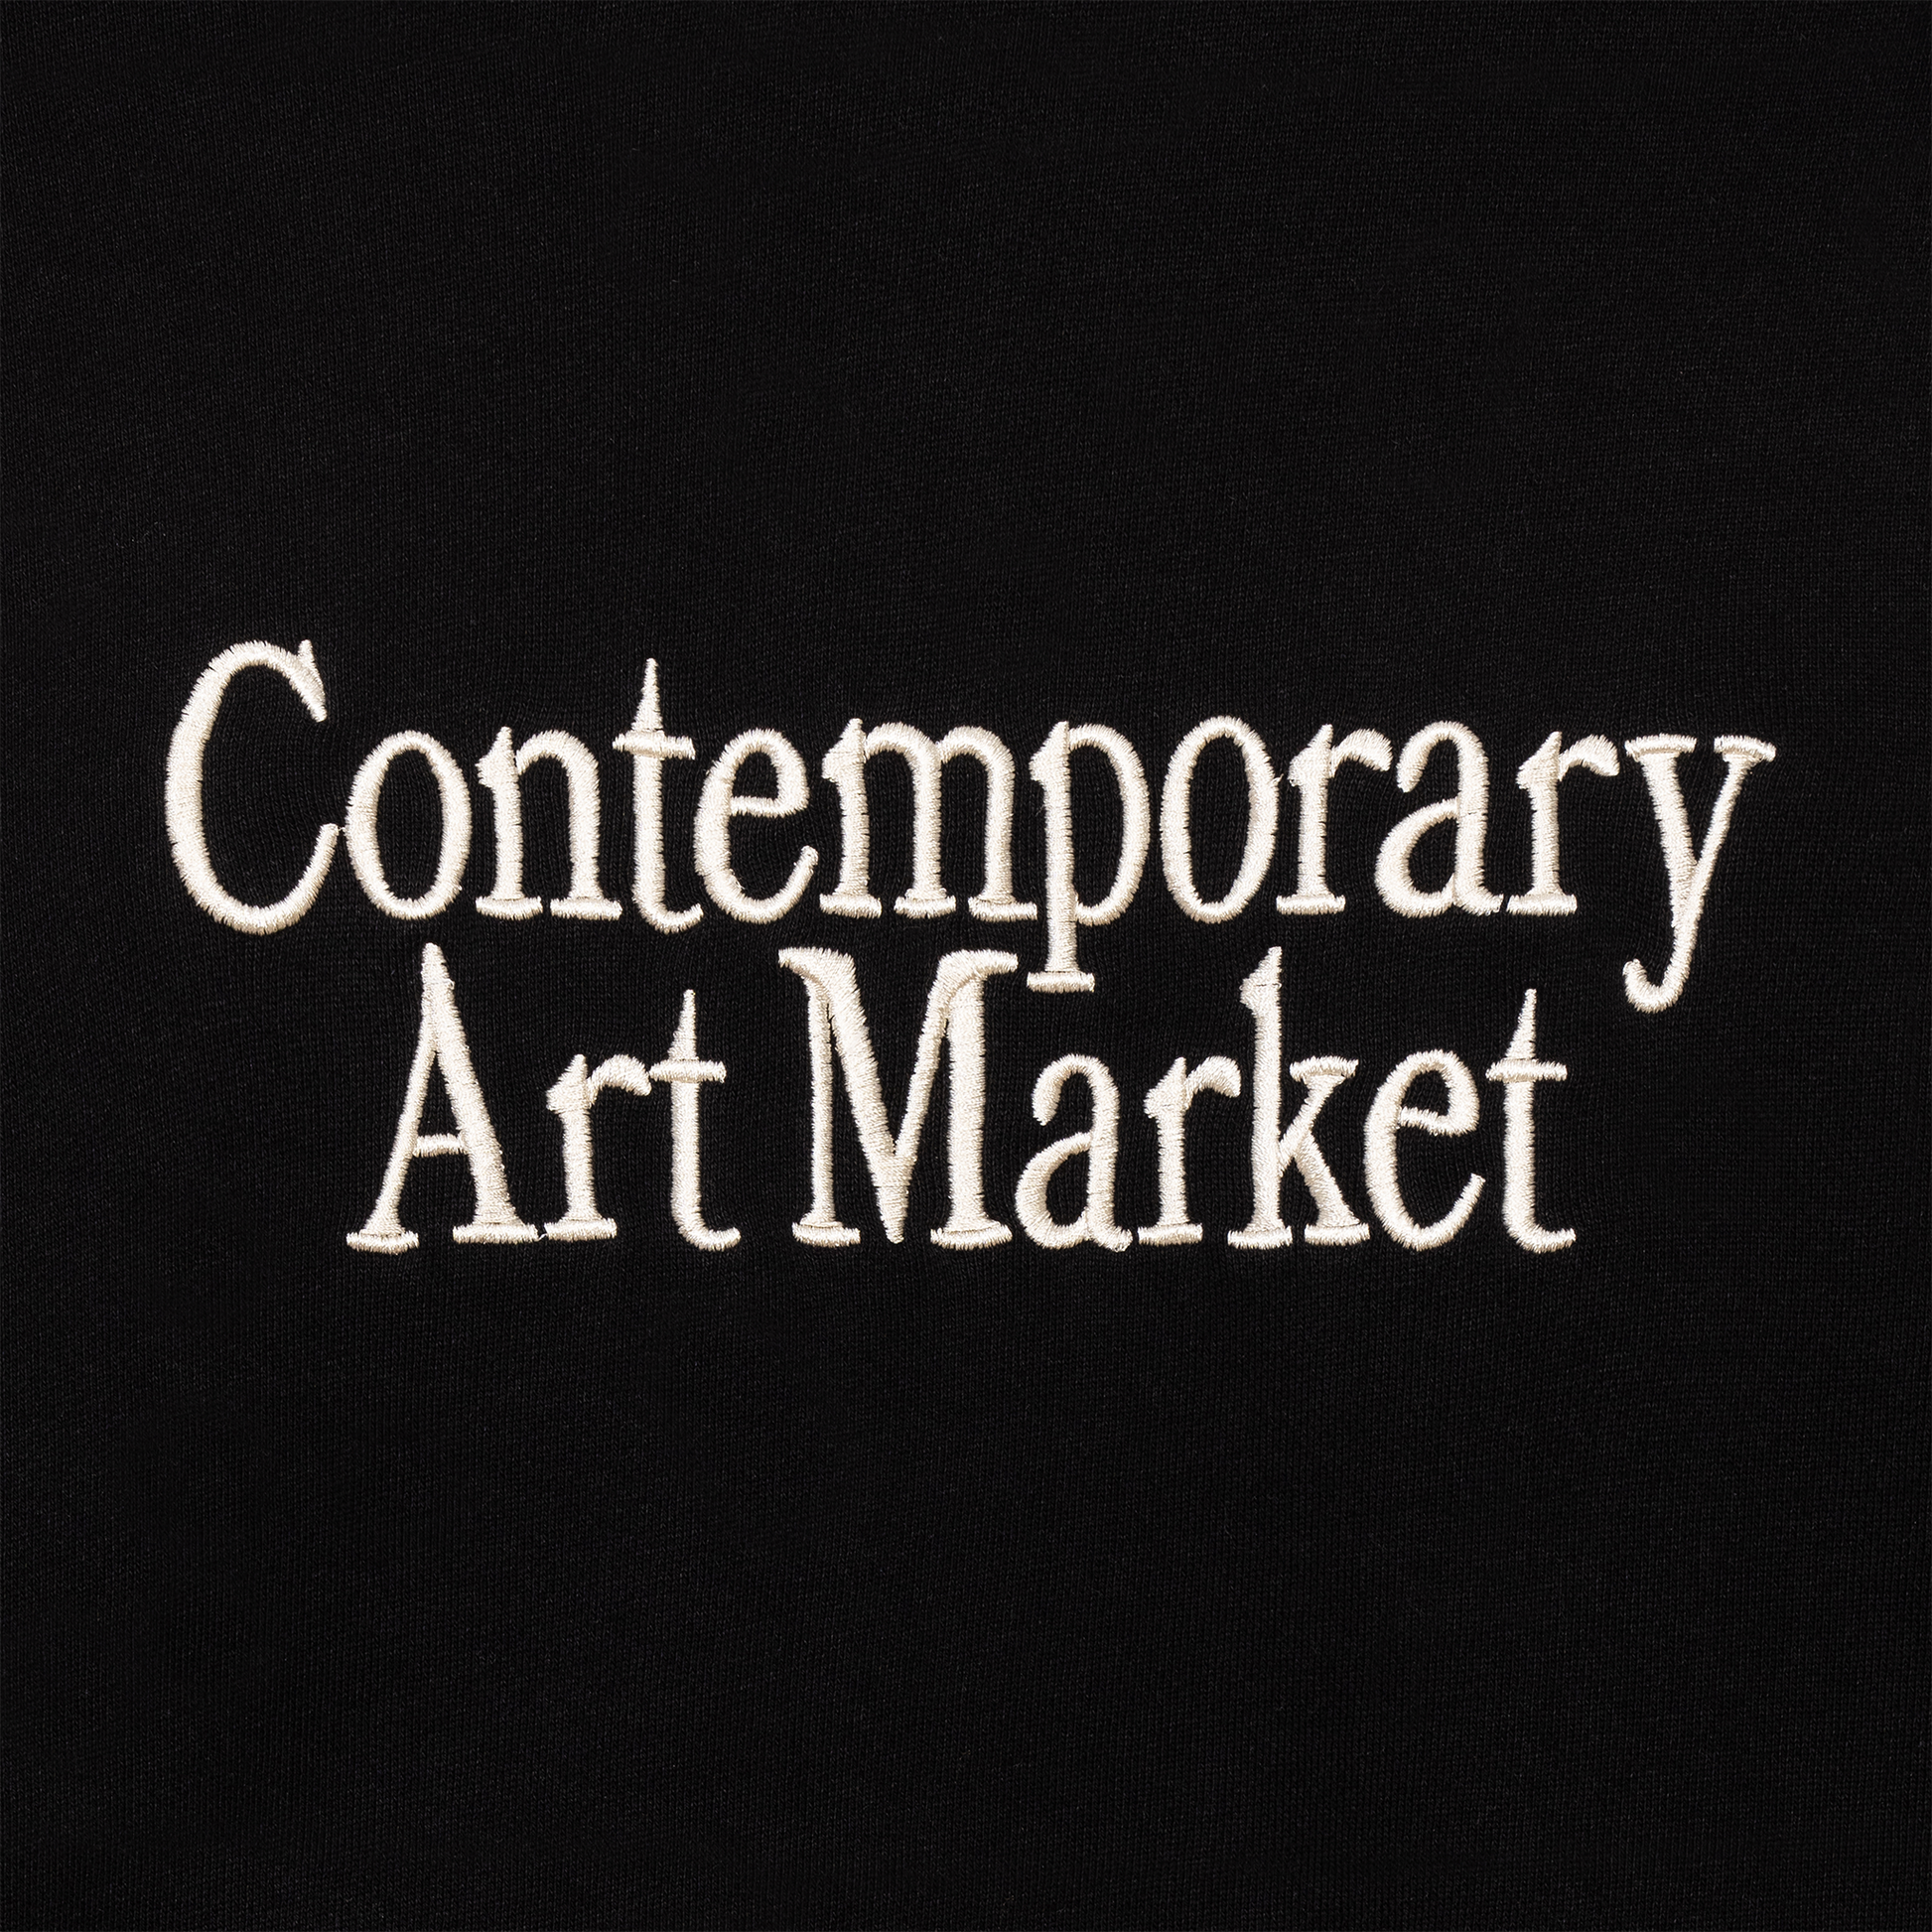 MARKET clothing brand CONTEMPORARY ART MARKET CREWNECK SWEATSHIRT. Find more graphic tees and hoodies at MarketStudios.com. Formally Chinatown Market.